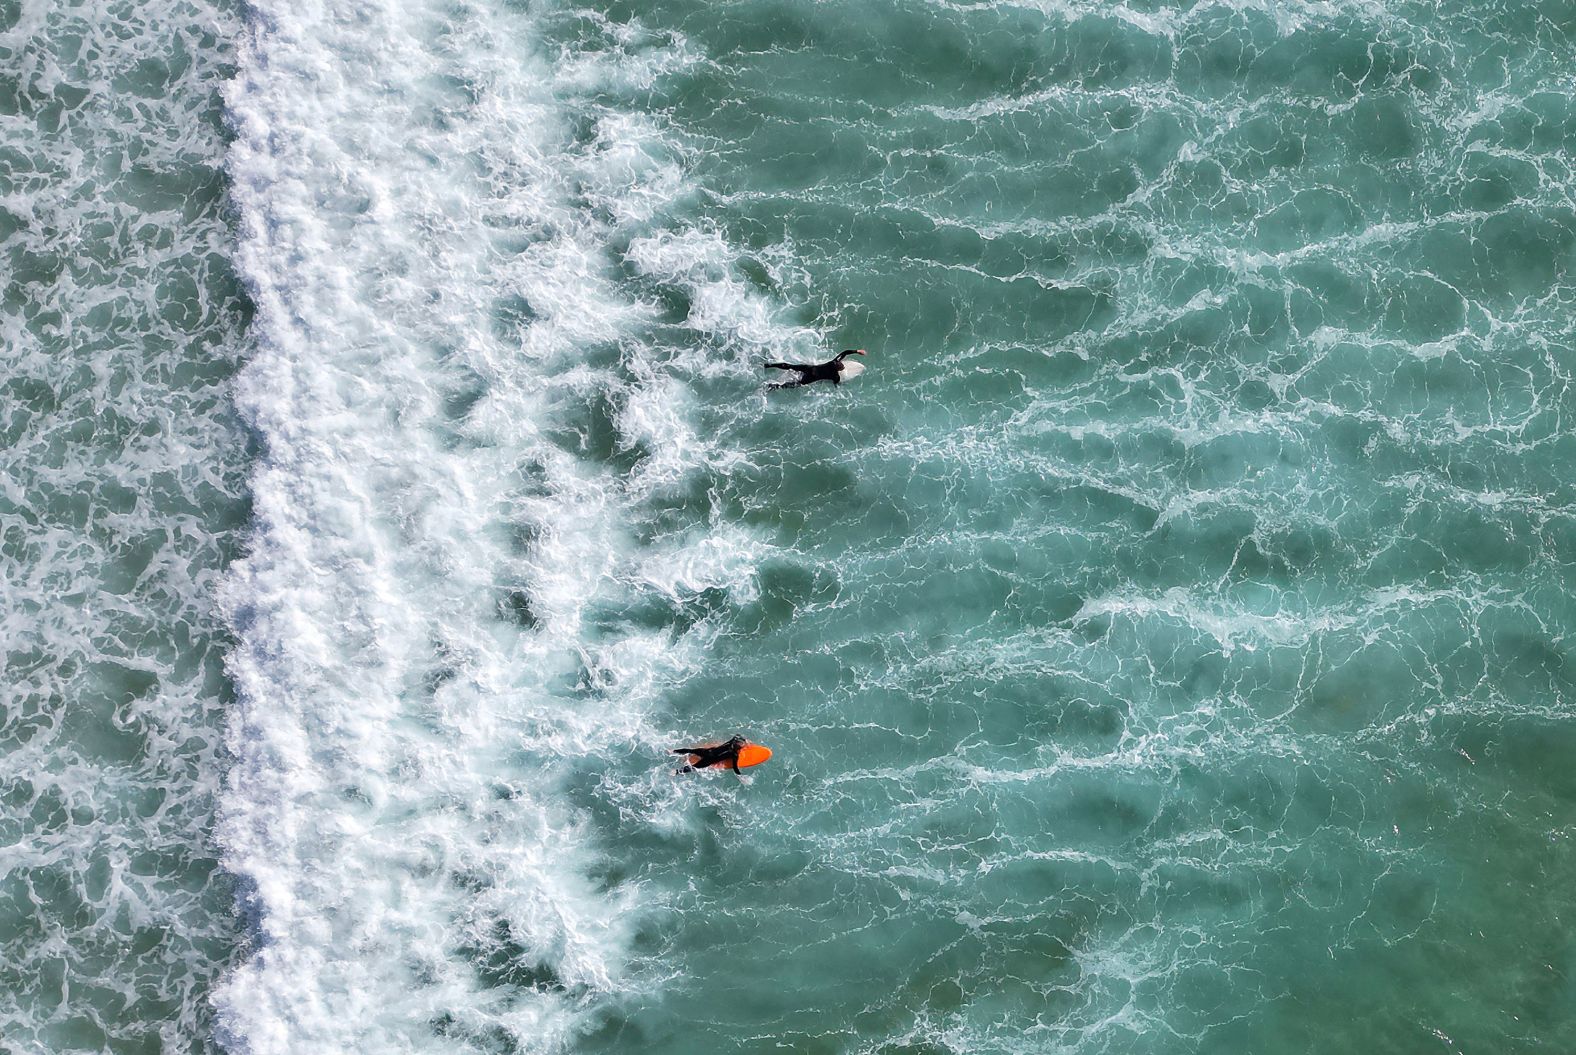 This photo, taken with a drone, shows surfers at Fistral Beach in Newquay, England, on Thursday, May 9.